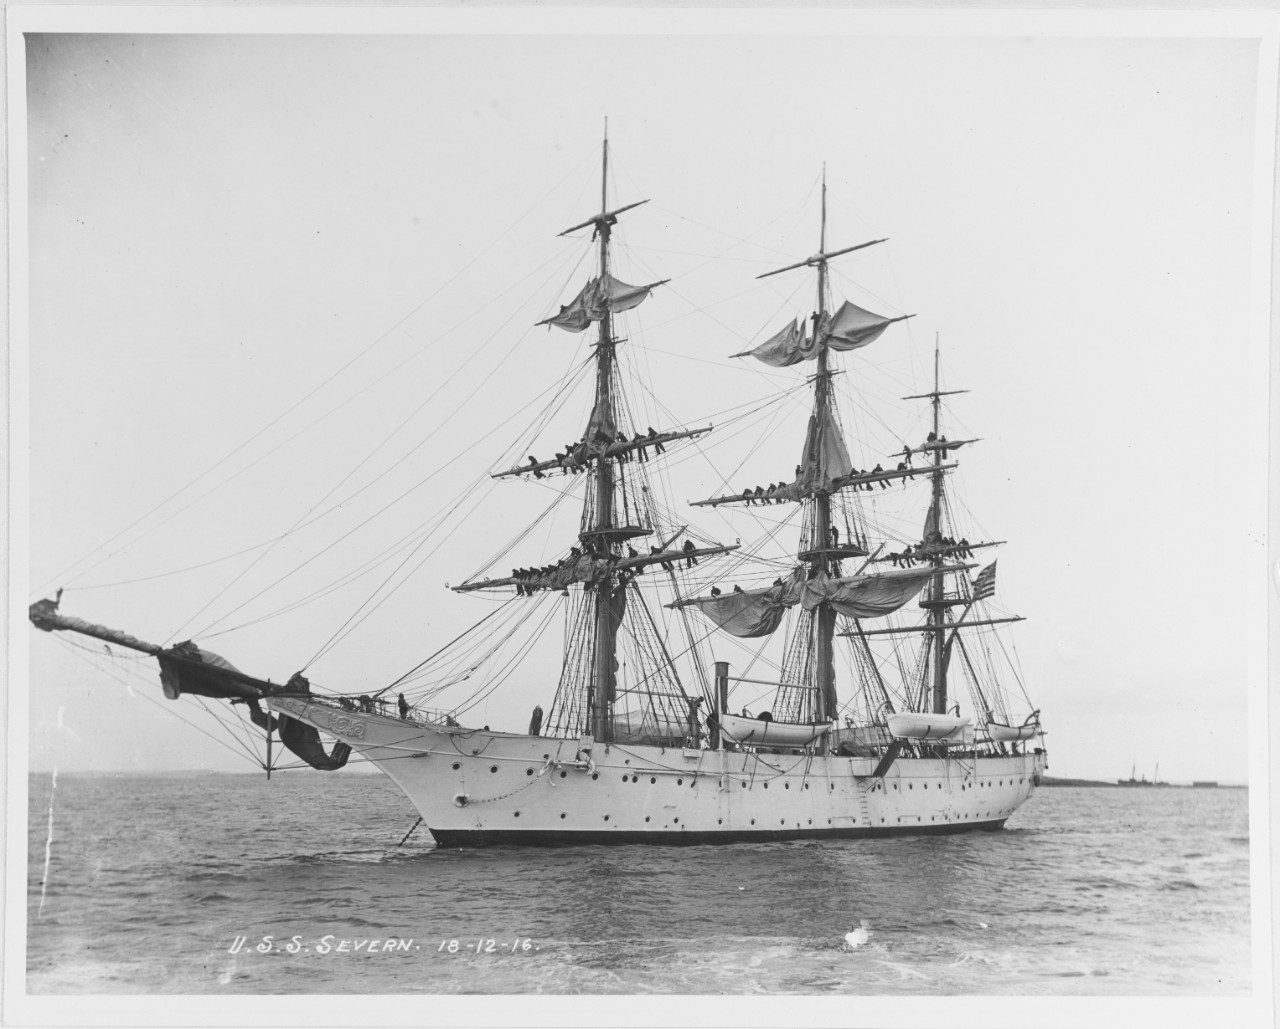 USS SEVERN (1899-1916), name changed from CHESAPEAKE, June 1905.